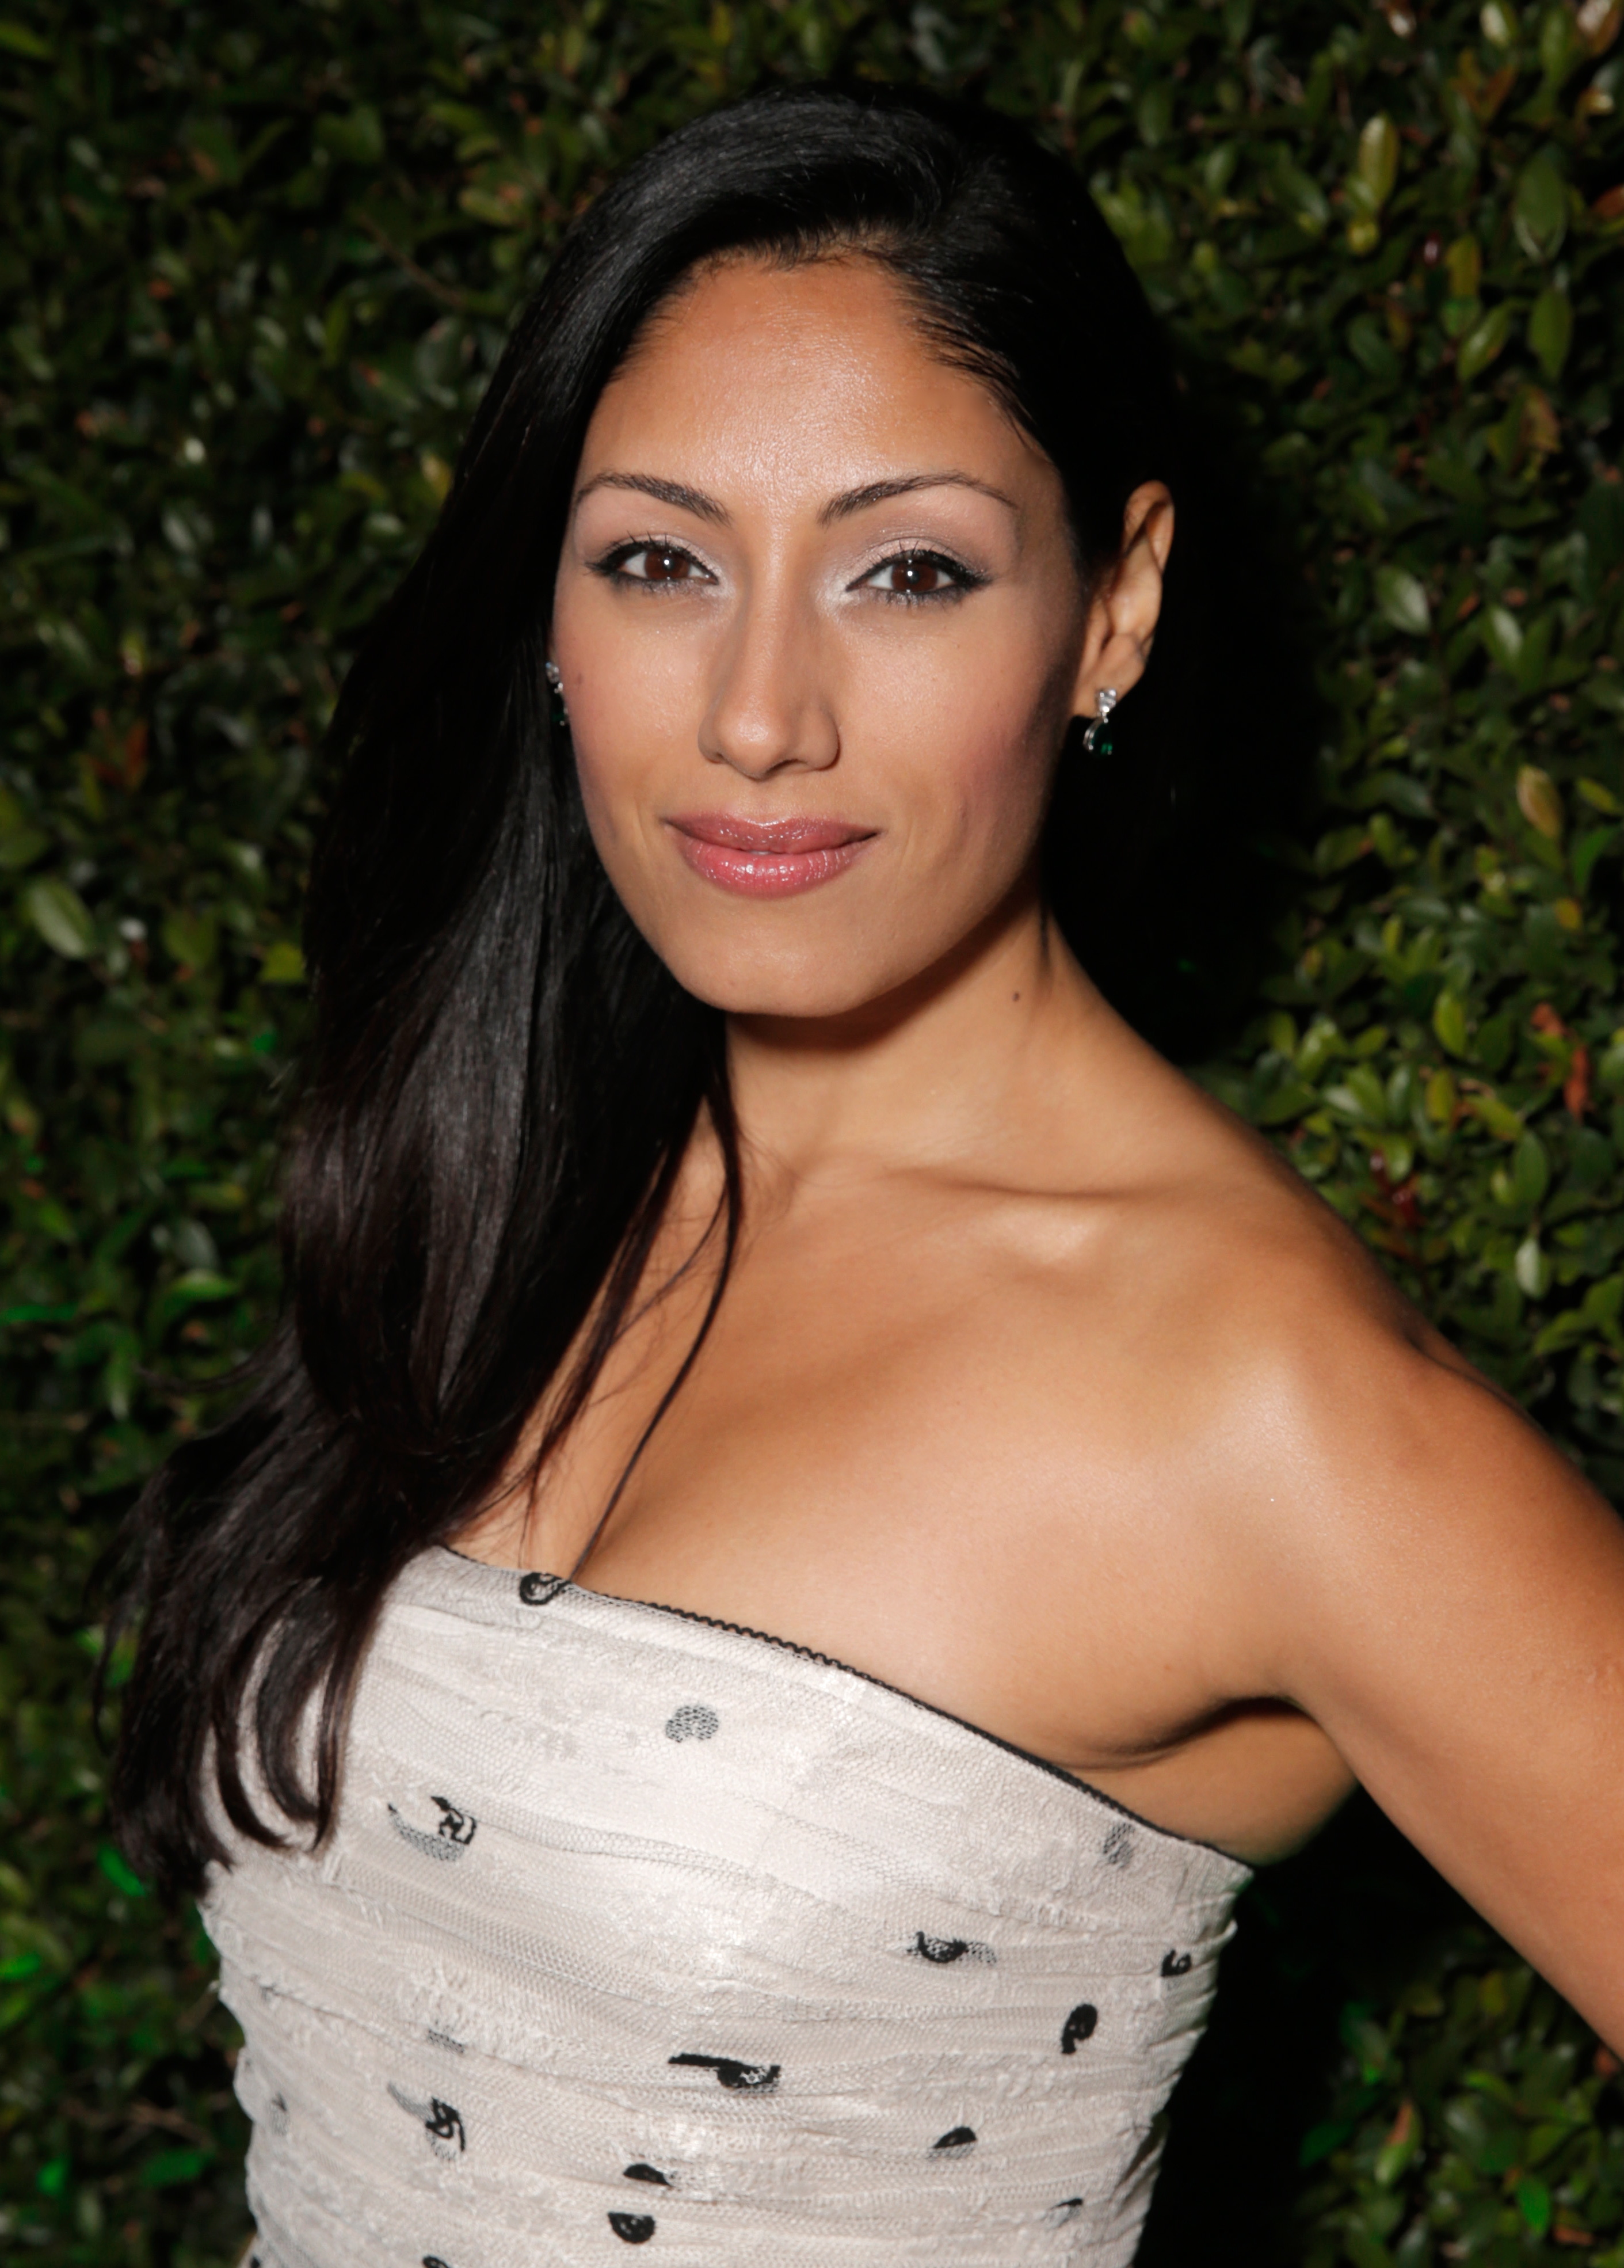 Tehmina Sunny attends the FOX after party for the 71st Annual Golden Globes award show on Sunday, Jan. 12, 2014 in Beverly Hills, Calif.